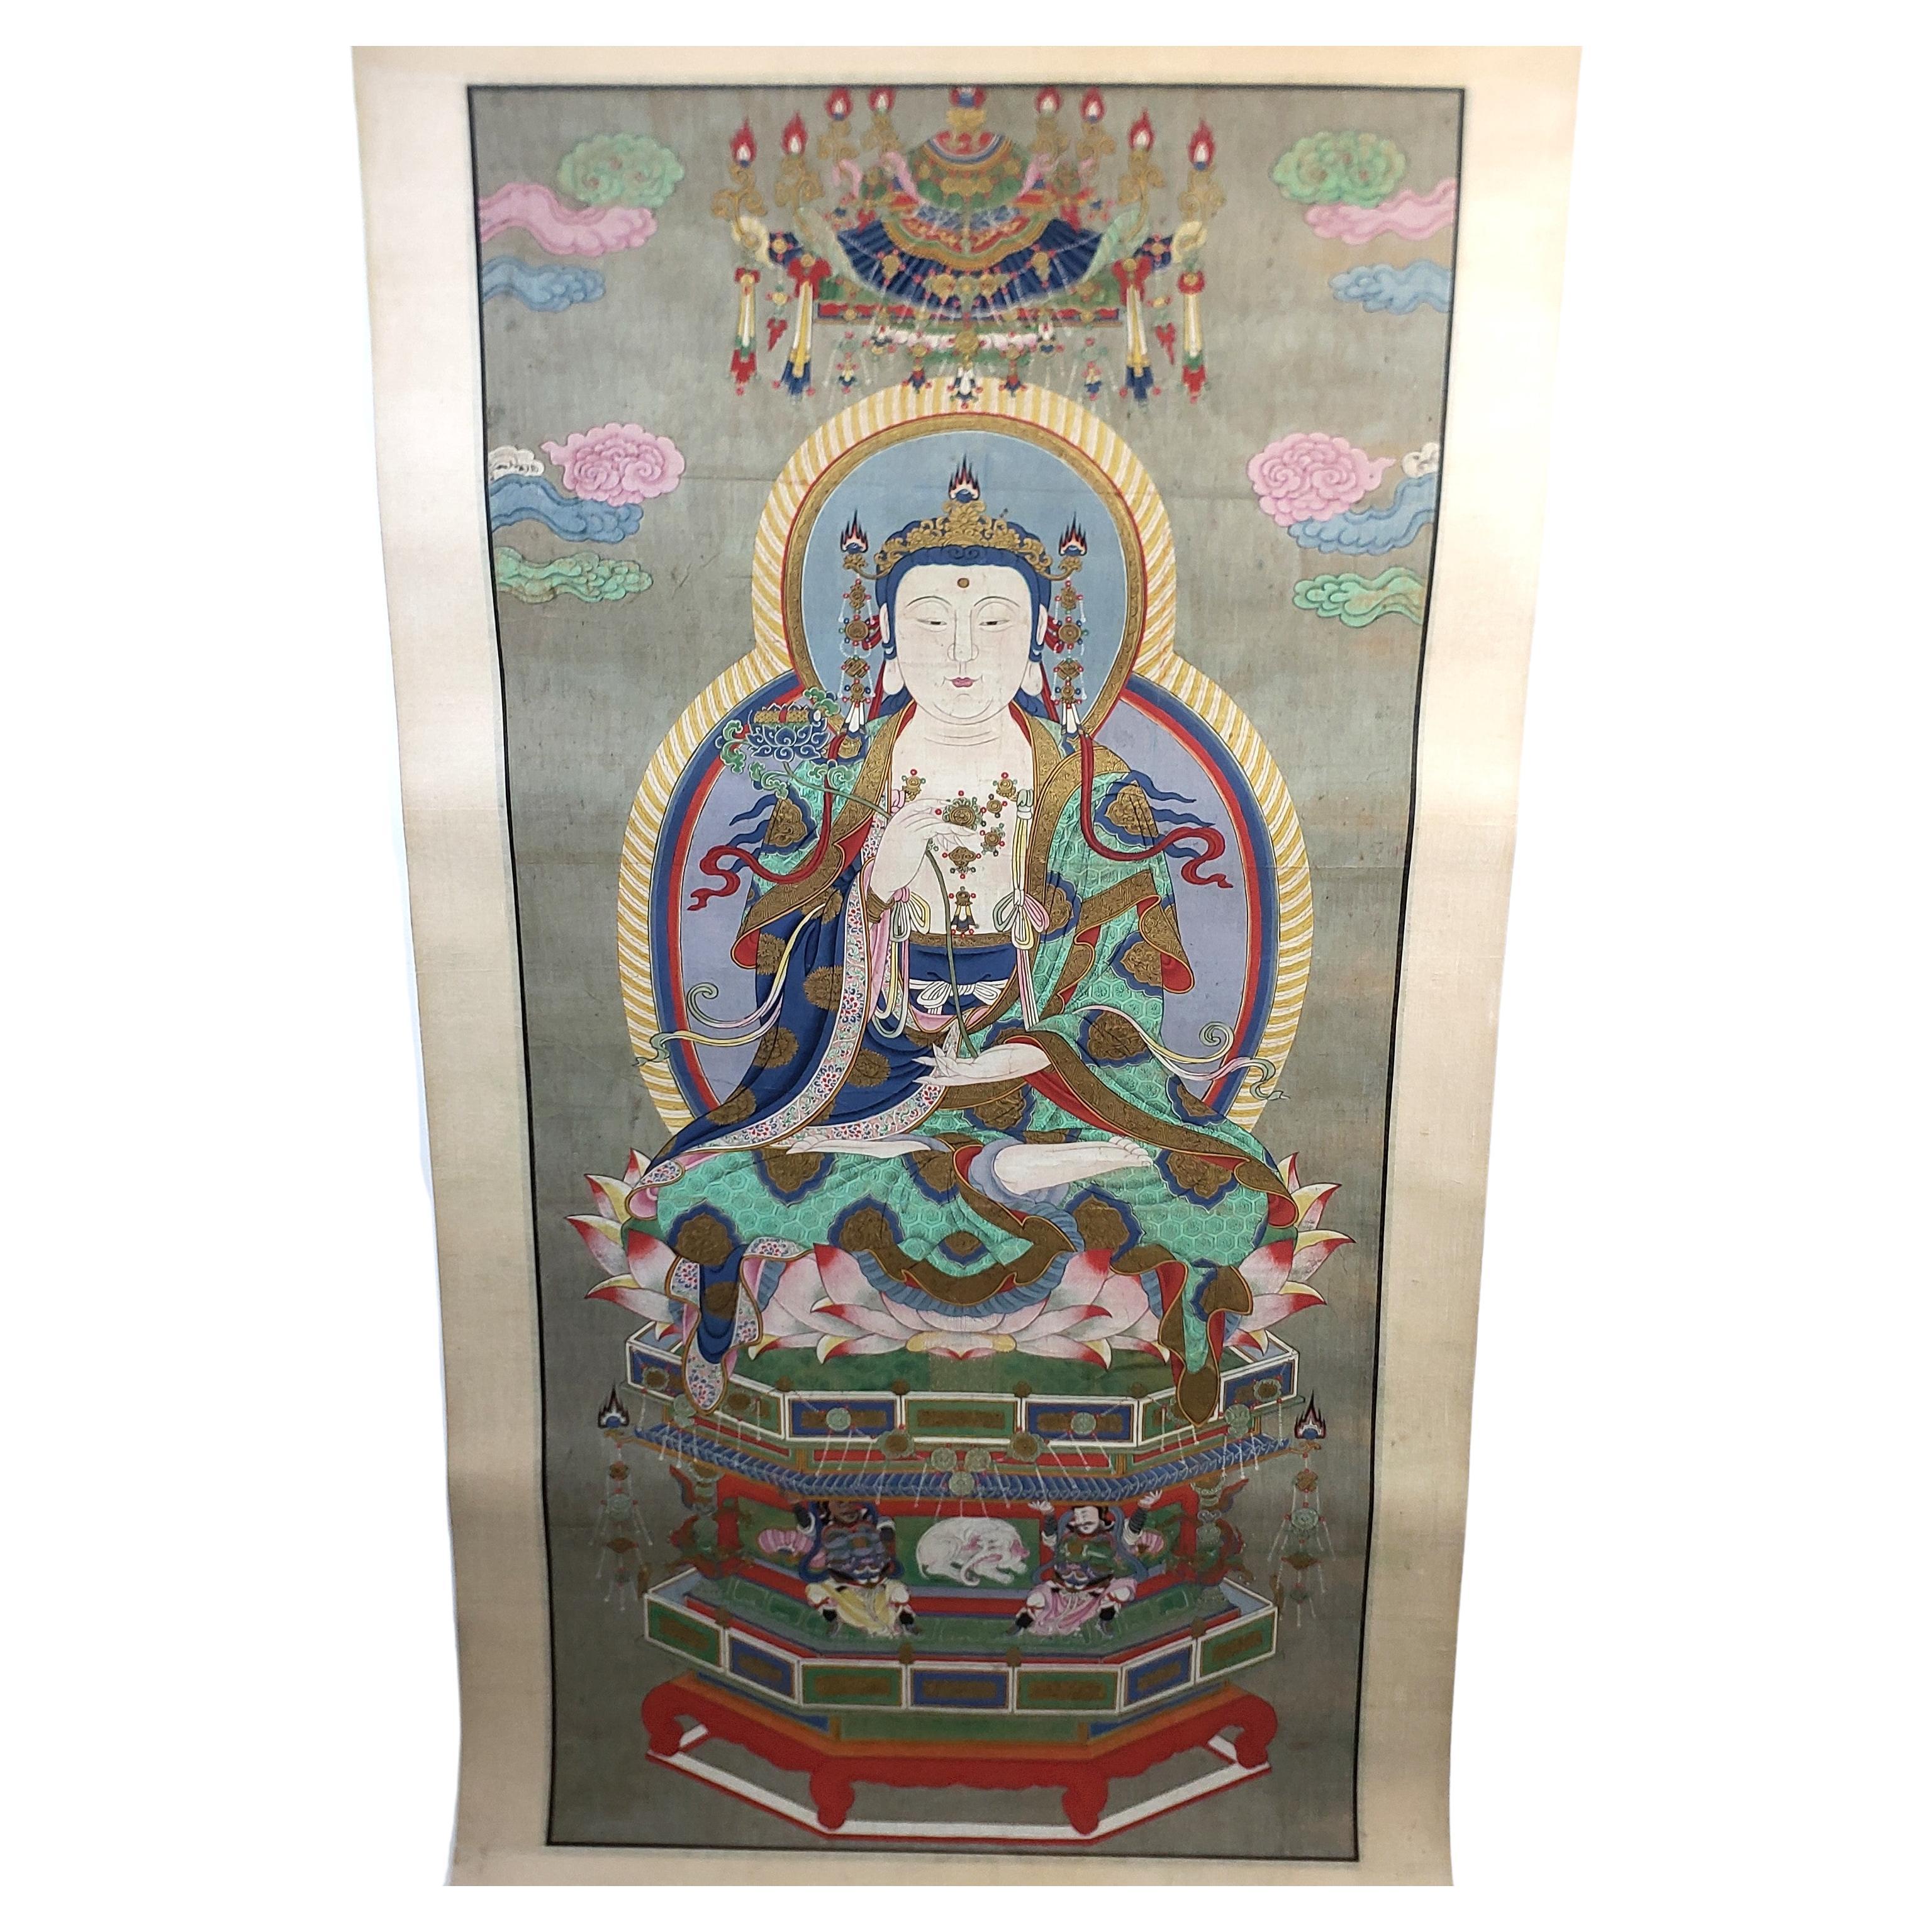 Large Antique Chinese Qing Dynasty Hand-Painted Buddhist Scroll on Silk In Good Condition For Sale In Hamilton, Ontario